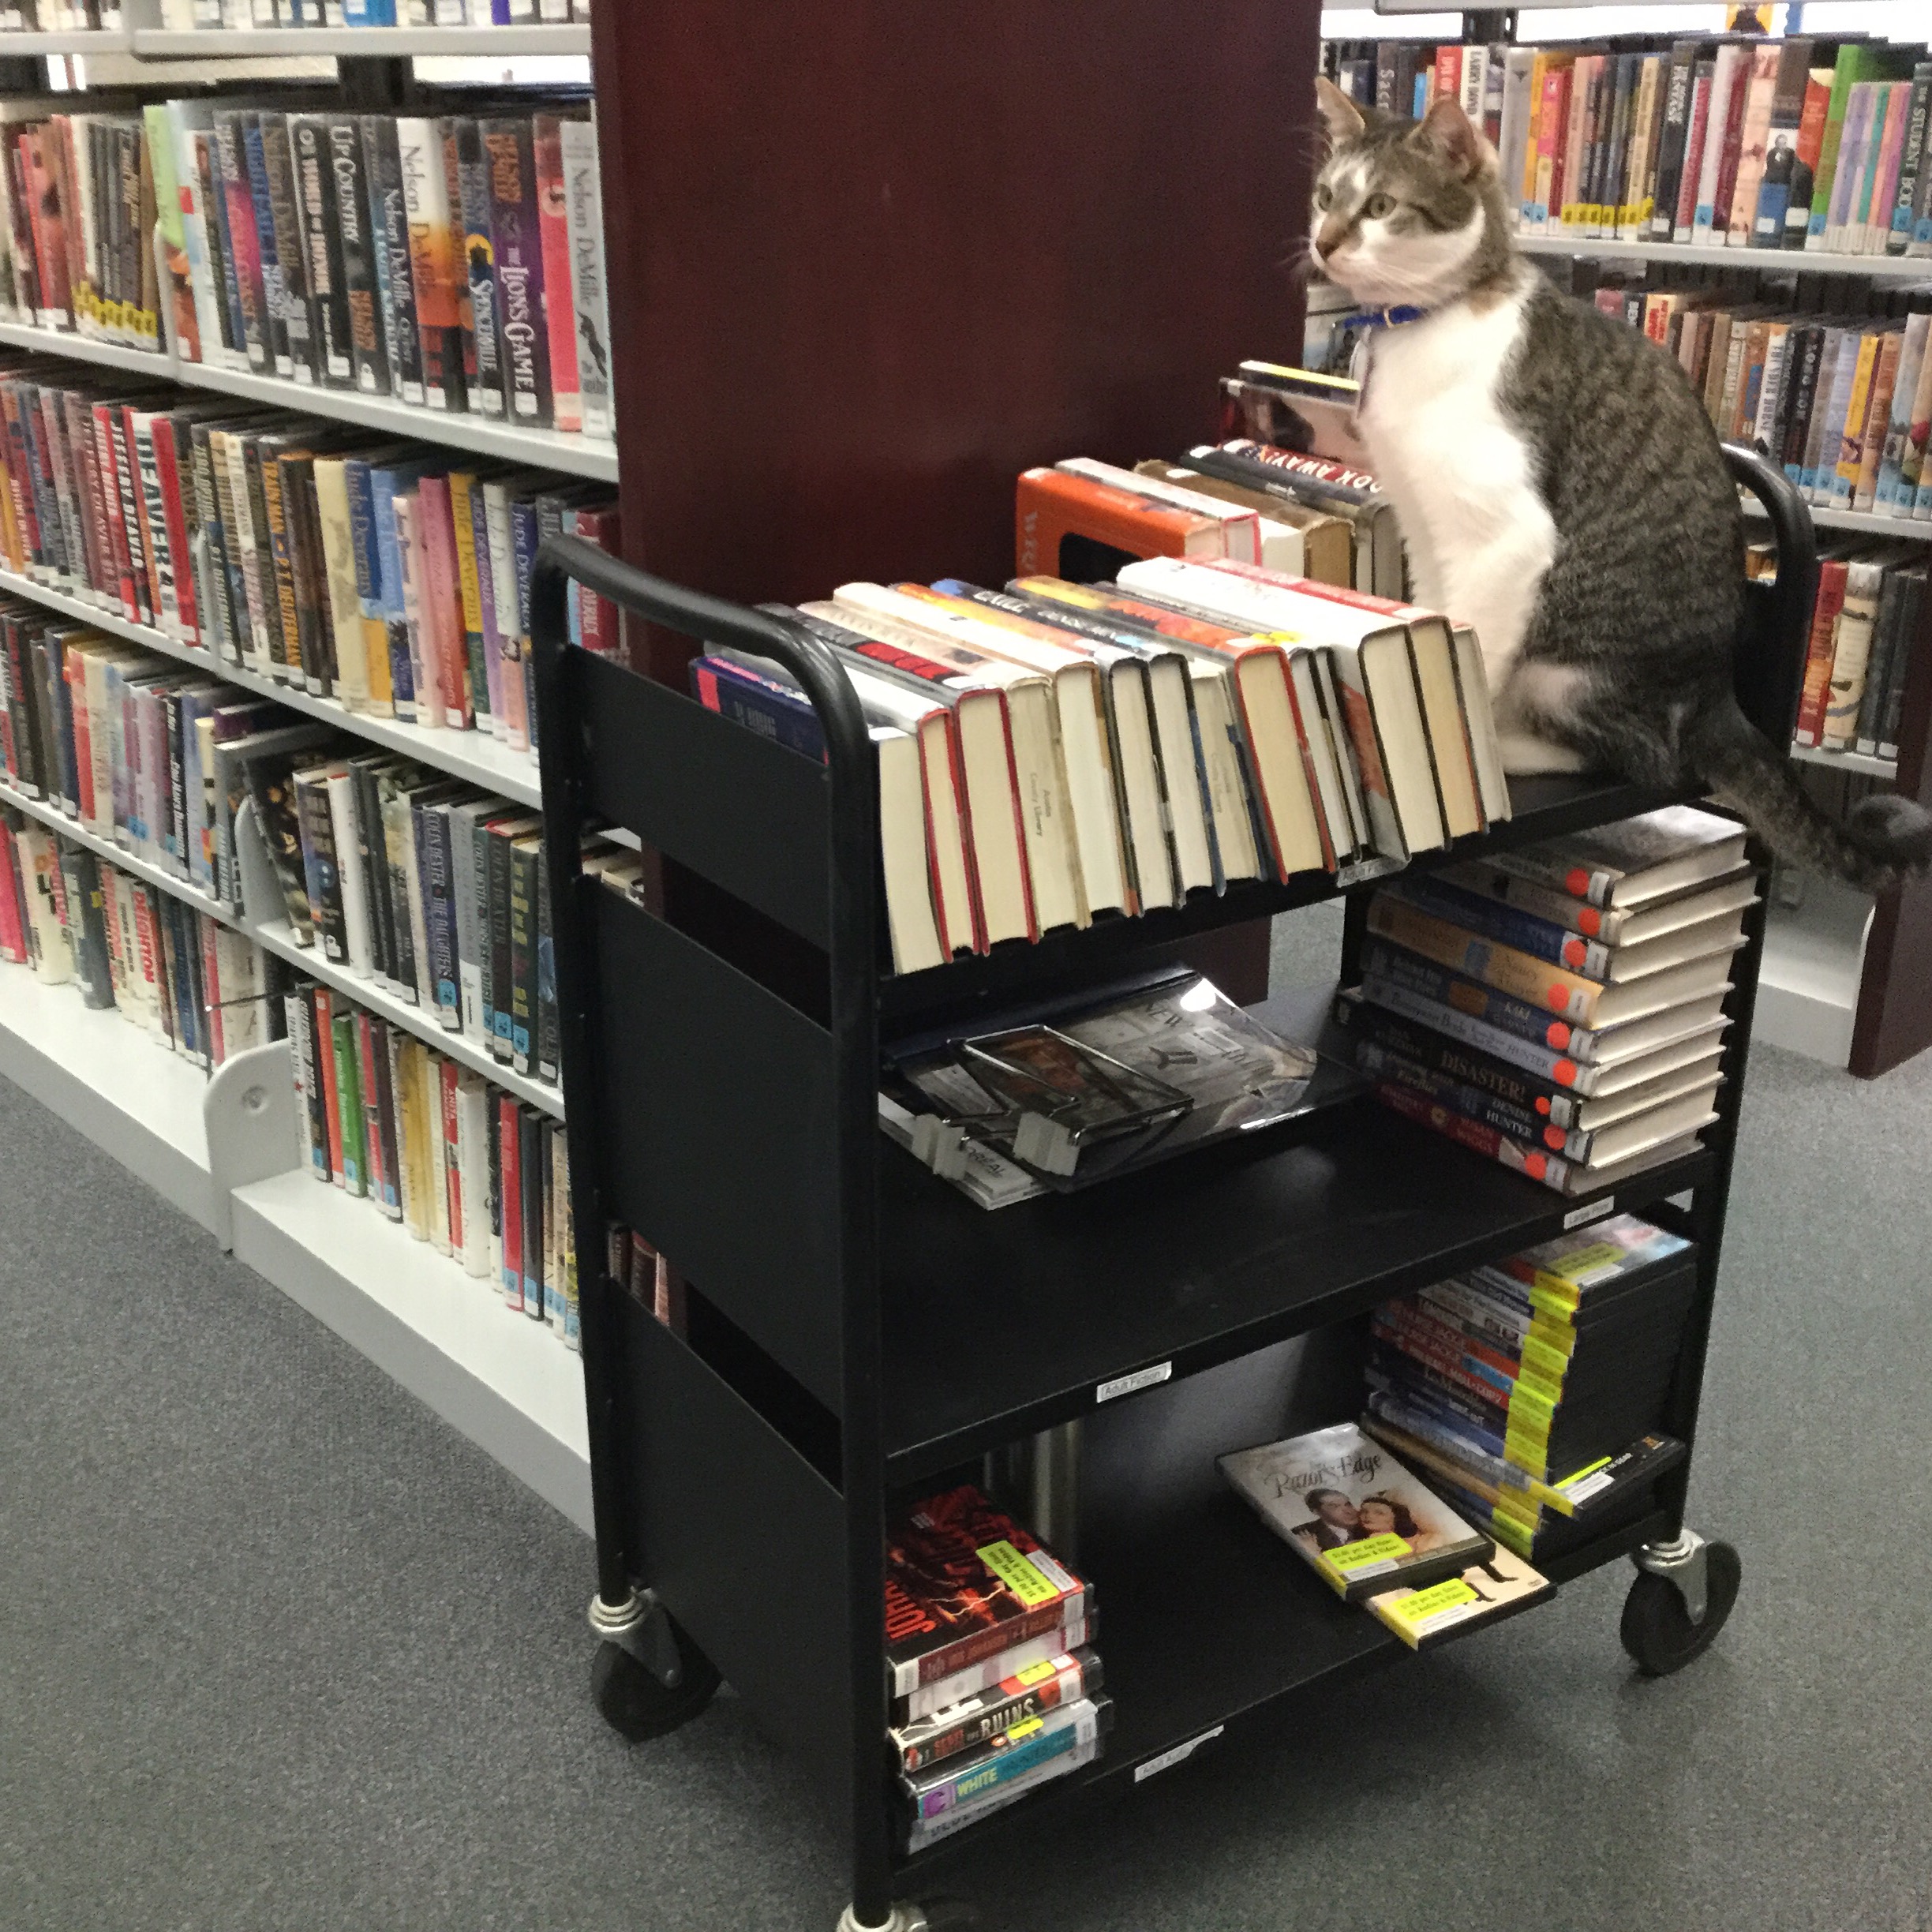 My Most Challenging Library Patron